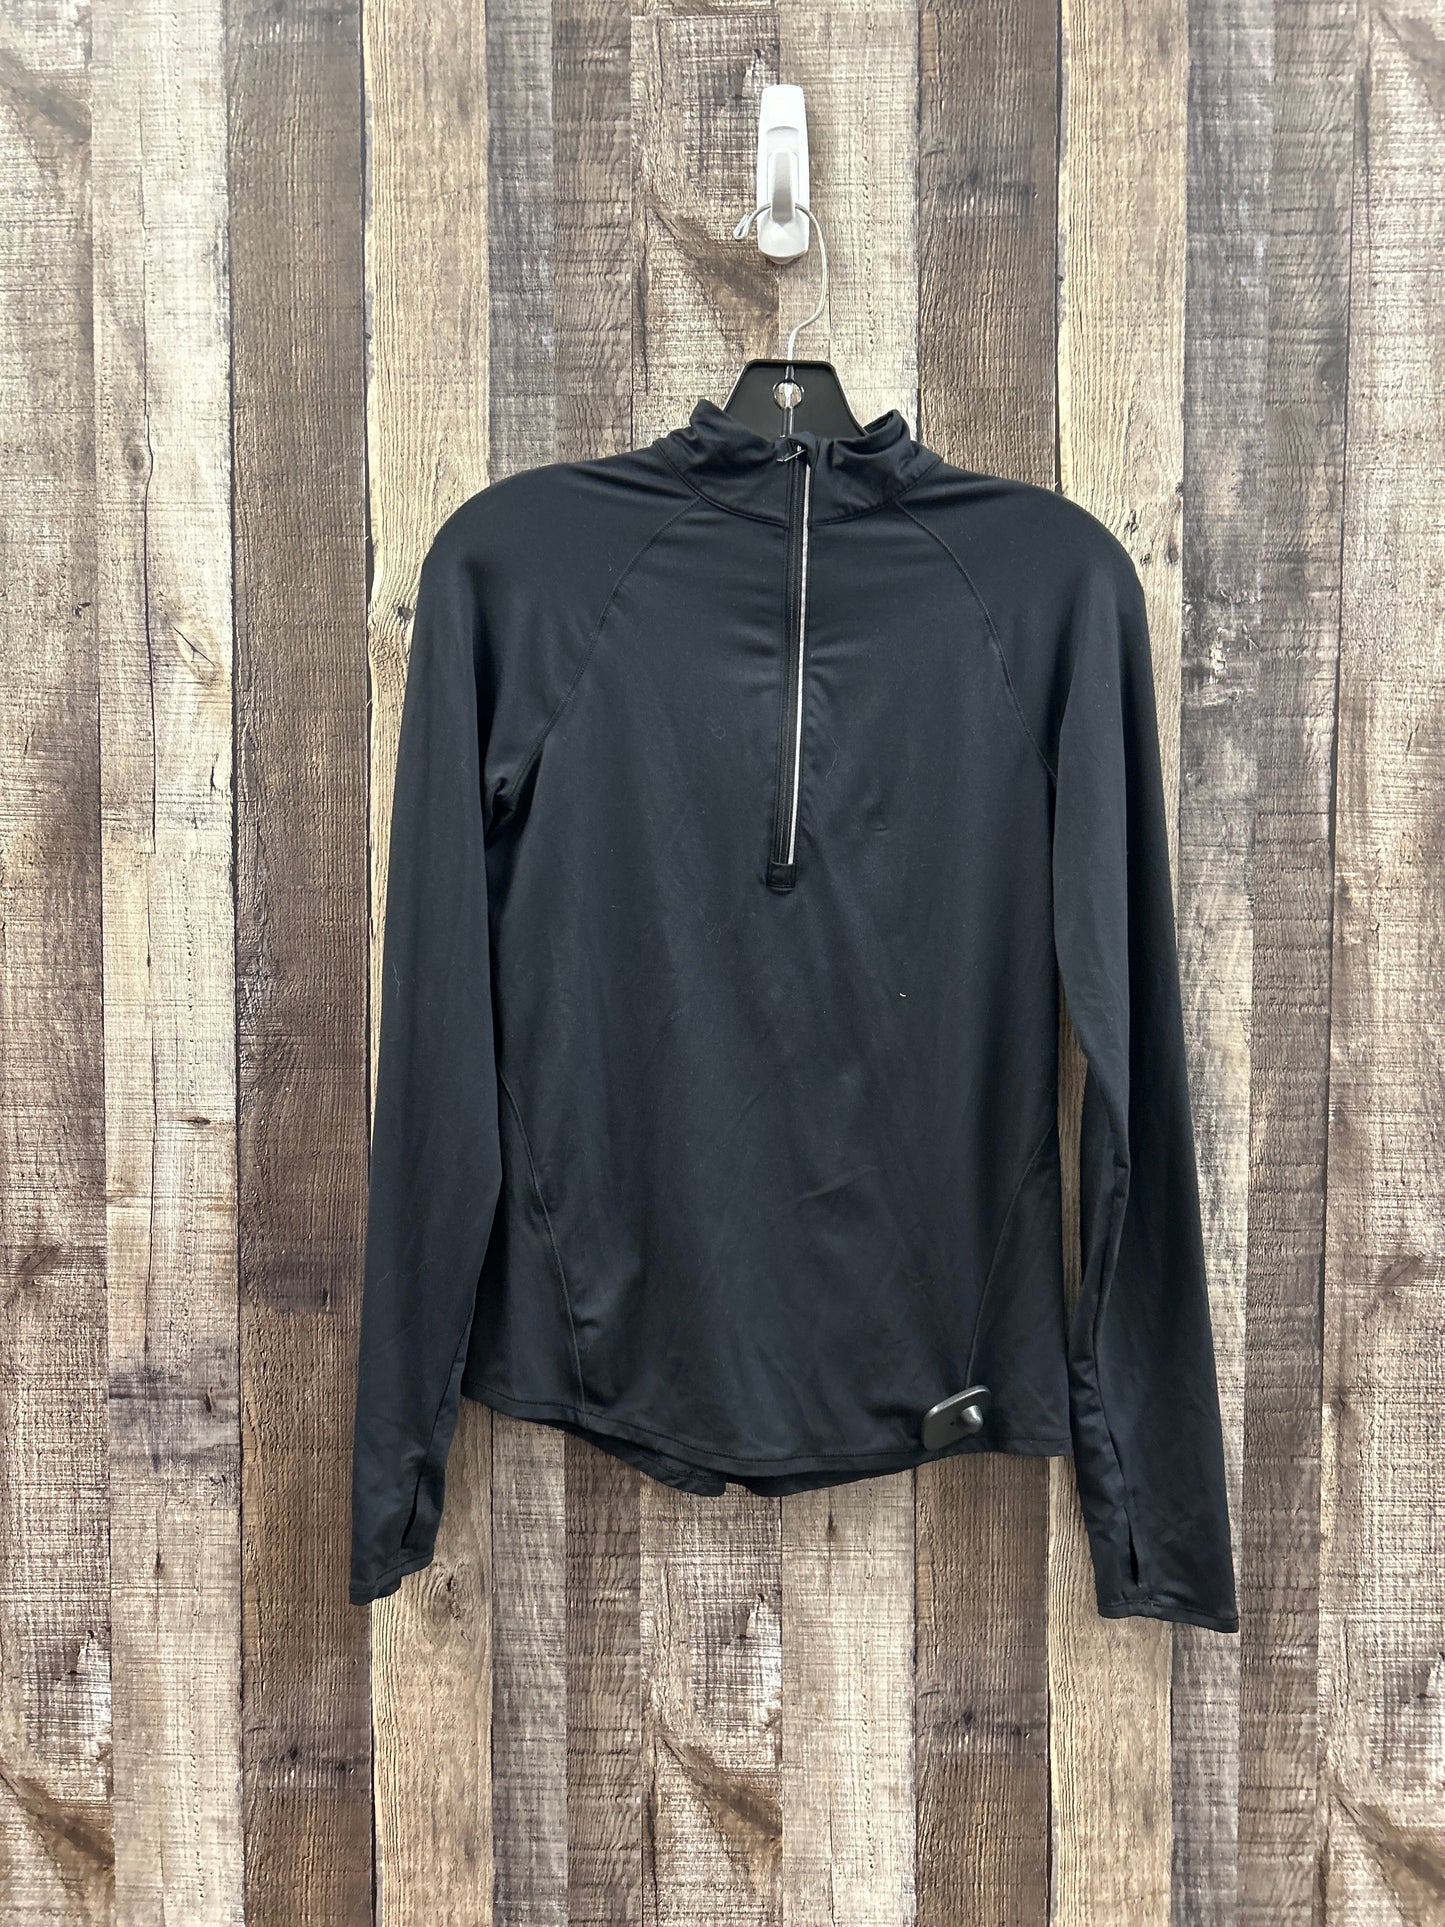 Black Athletic Top Long Sleeve Collar All In Motion, Size Xs